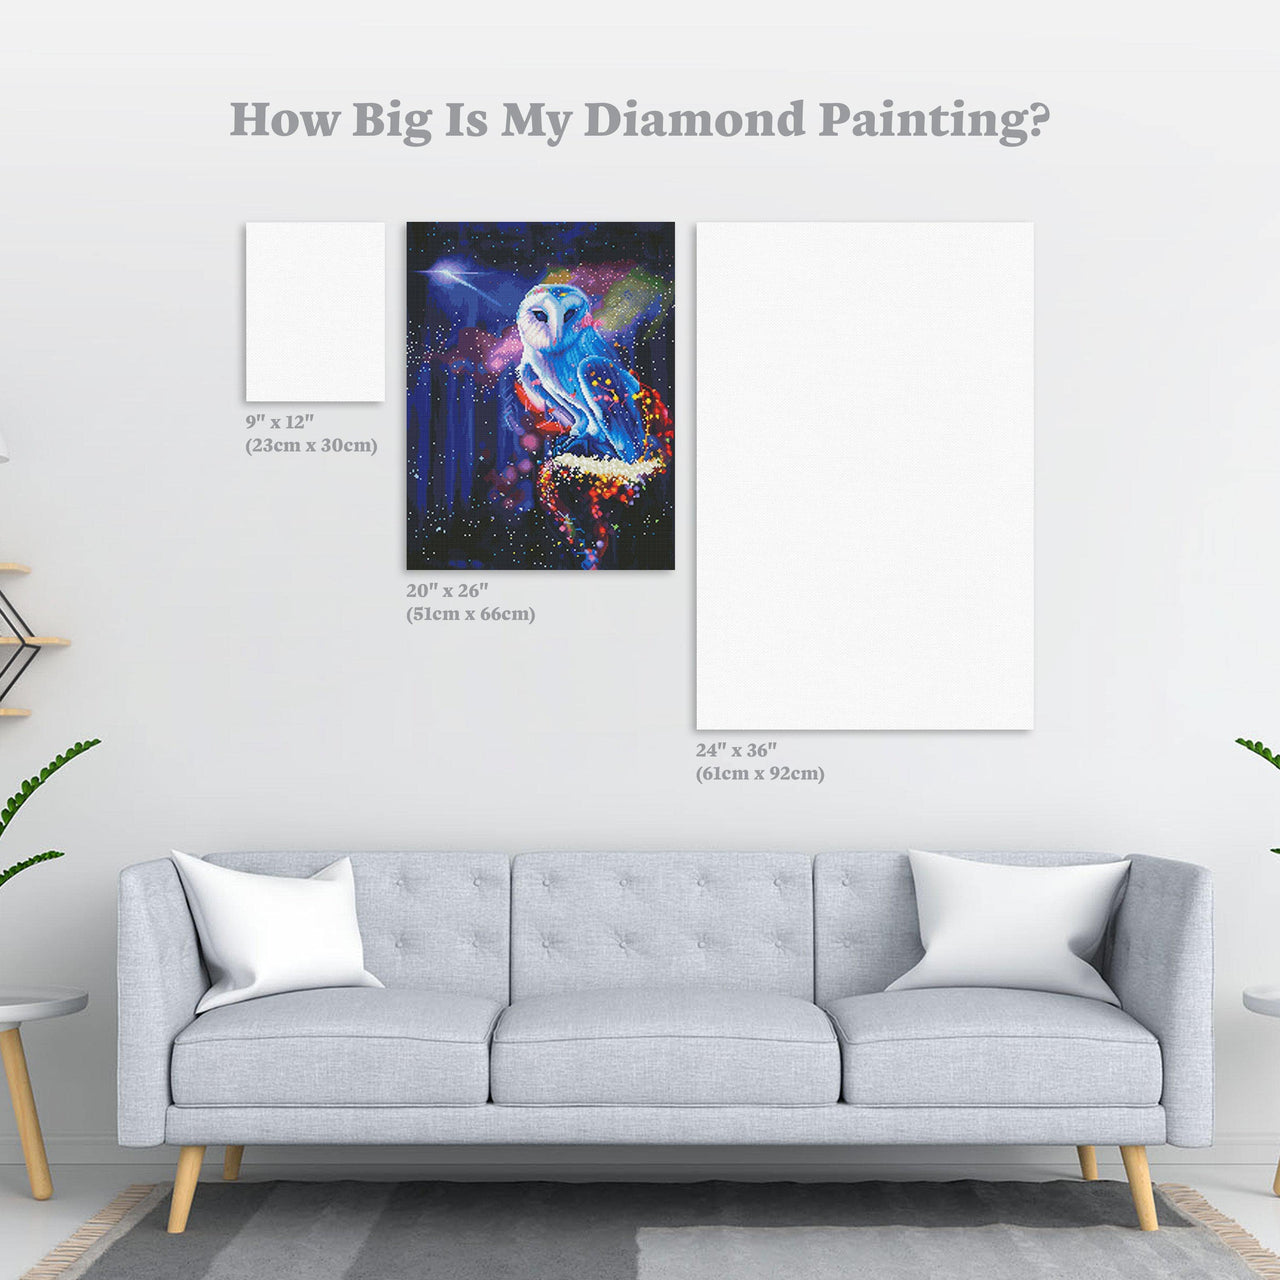 Diamond Painting Heavens Whisper 20" x 26″ (51cm x 66cm) / Round With 60 Colors Including 4 ABs / 42,534